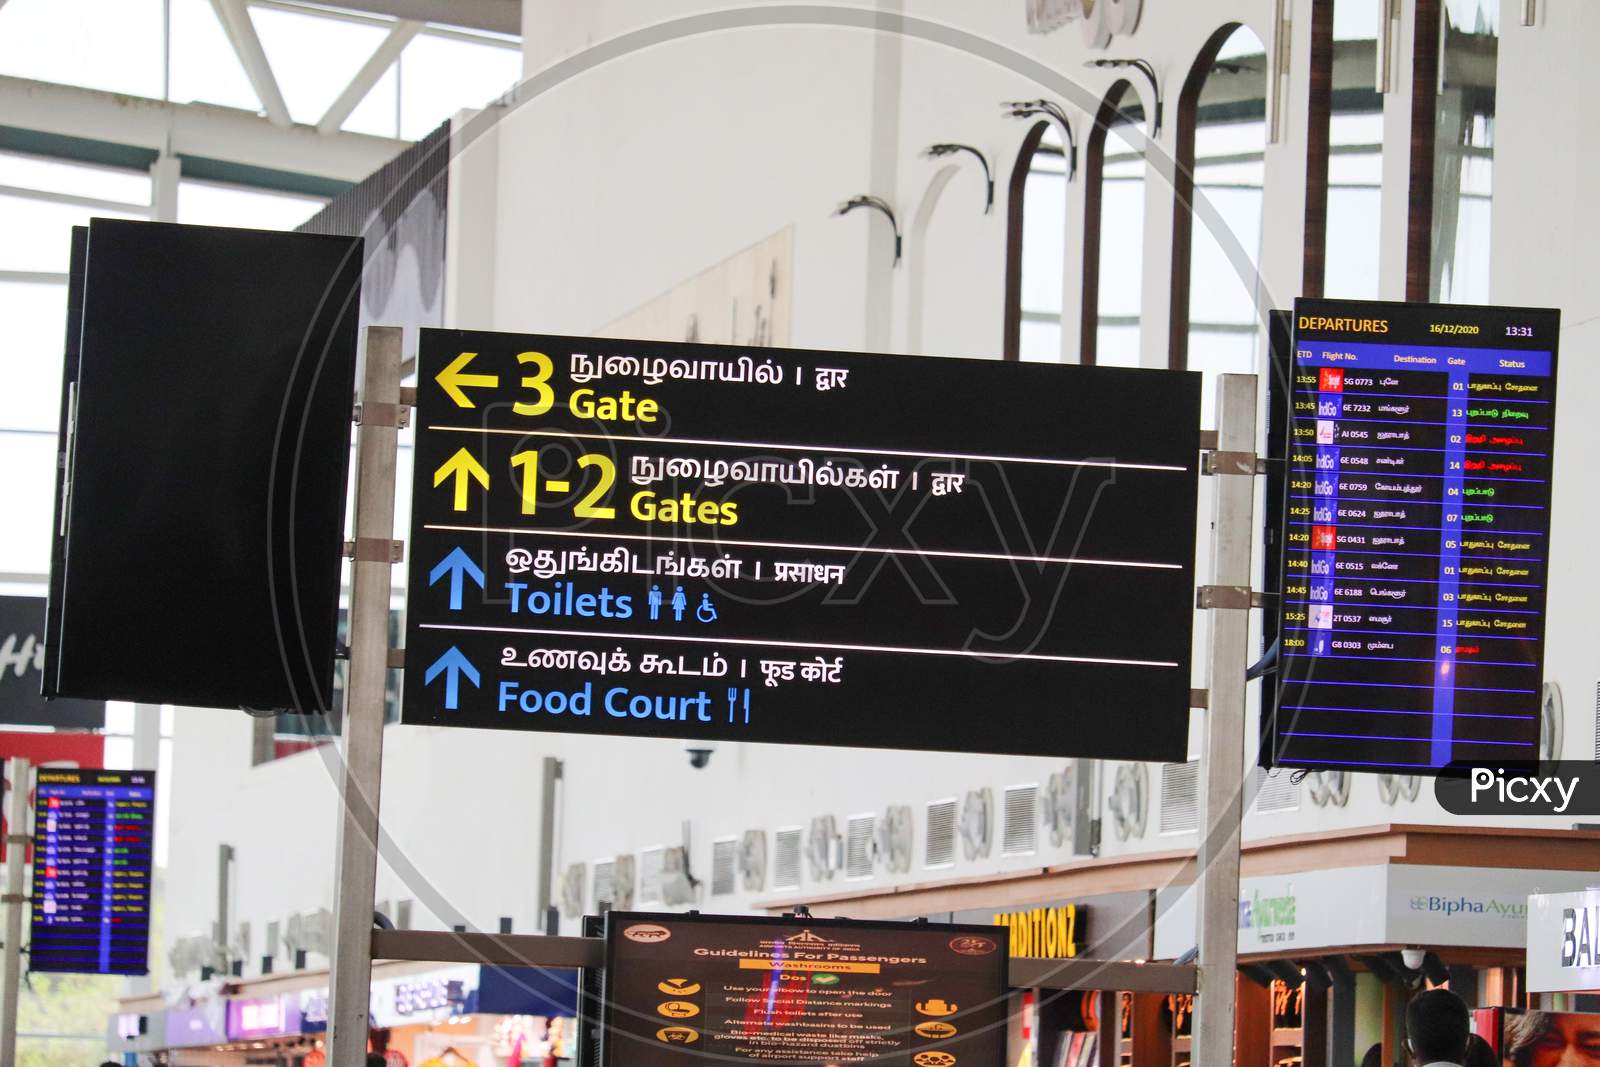 Signboard Displaying Boarding Gate Information In English, Tamil, At The Chennai International Airport.